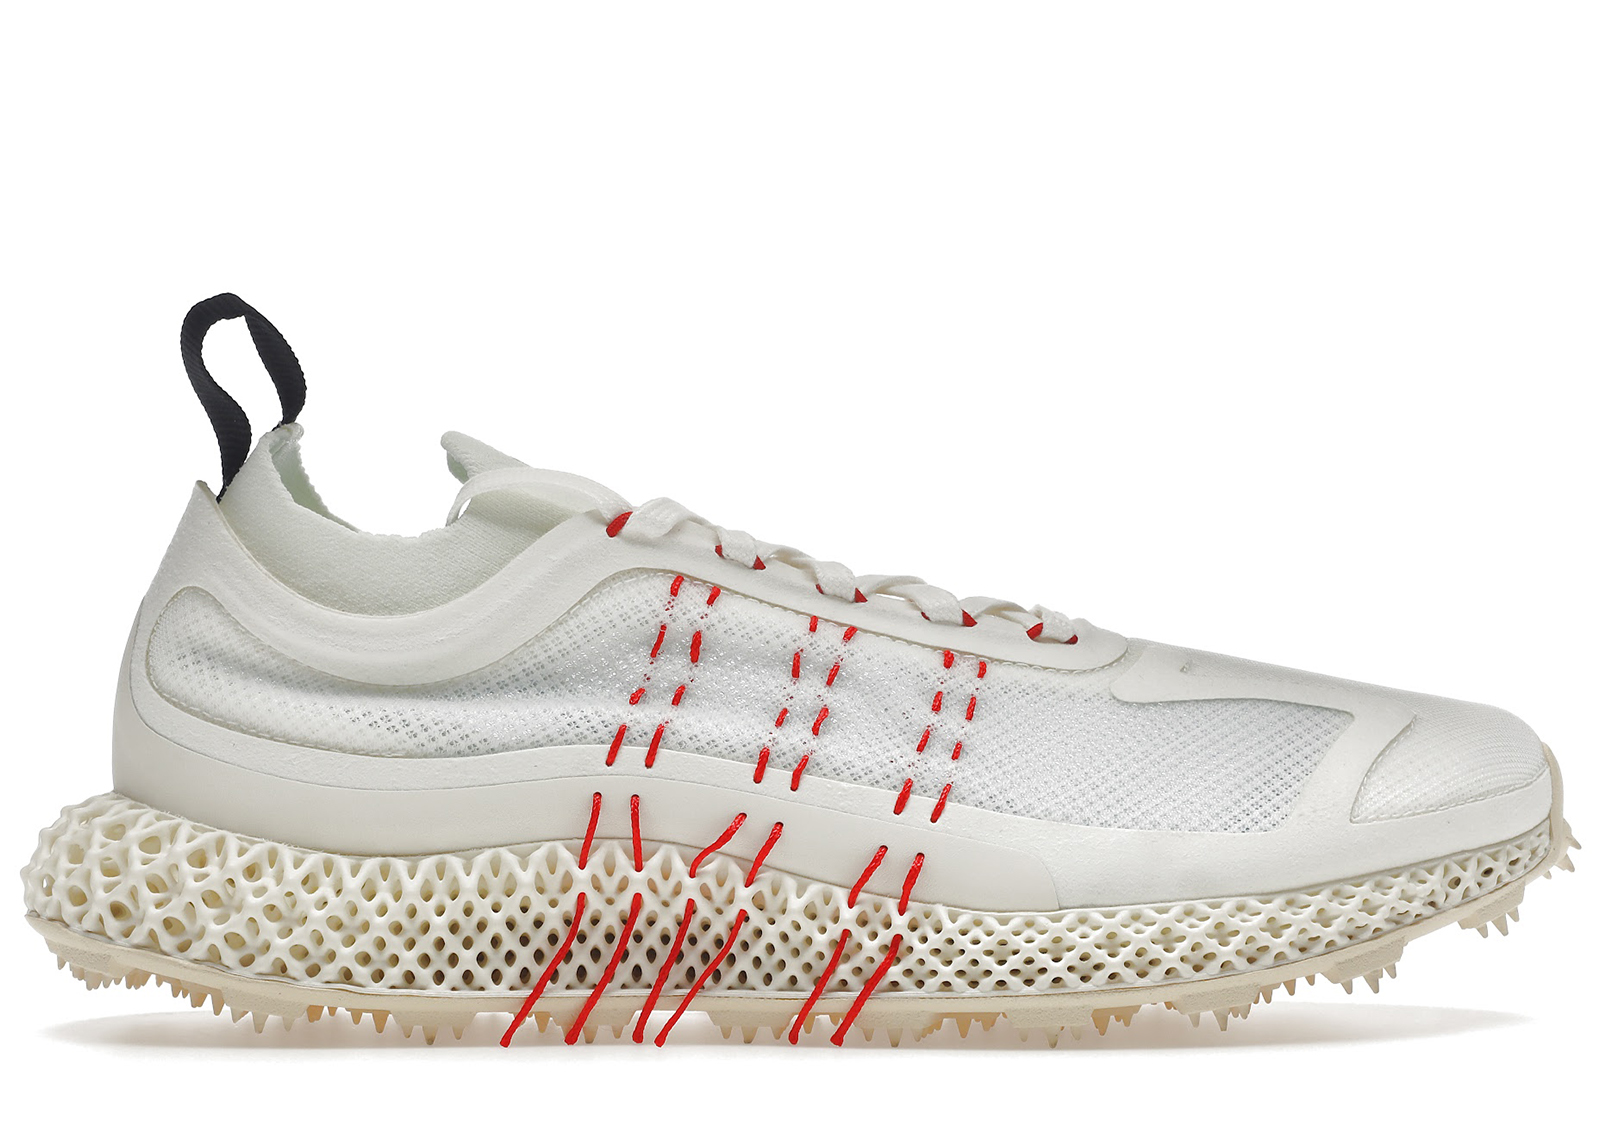 adidas Y-3 Runner Halo 4D Core White Red